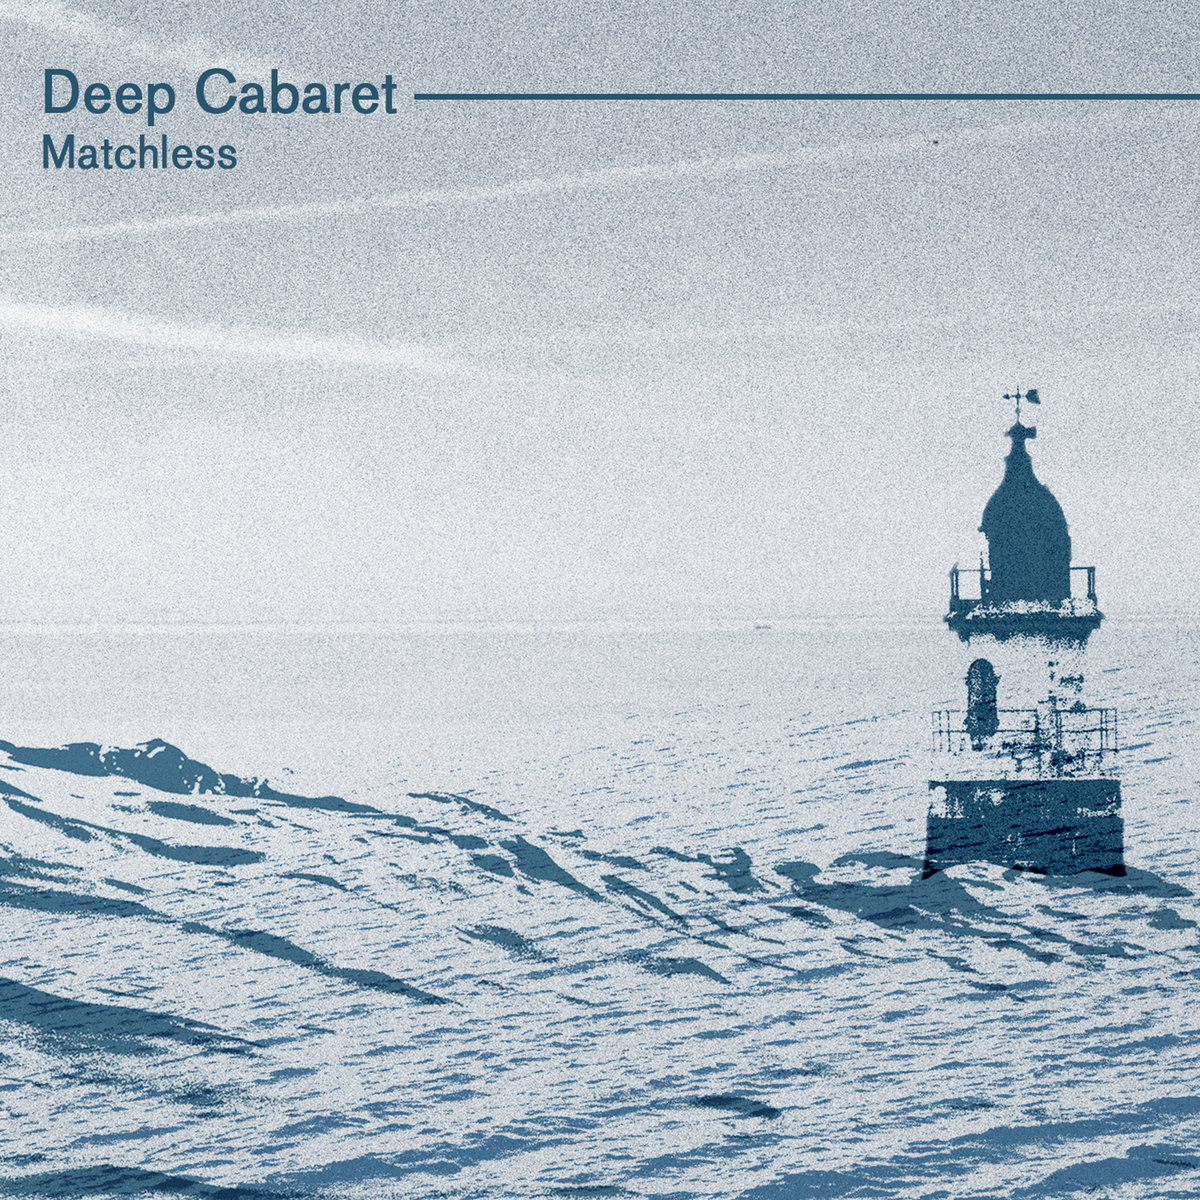 Matchless by Deep Cabaret